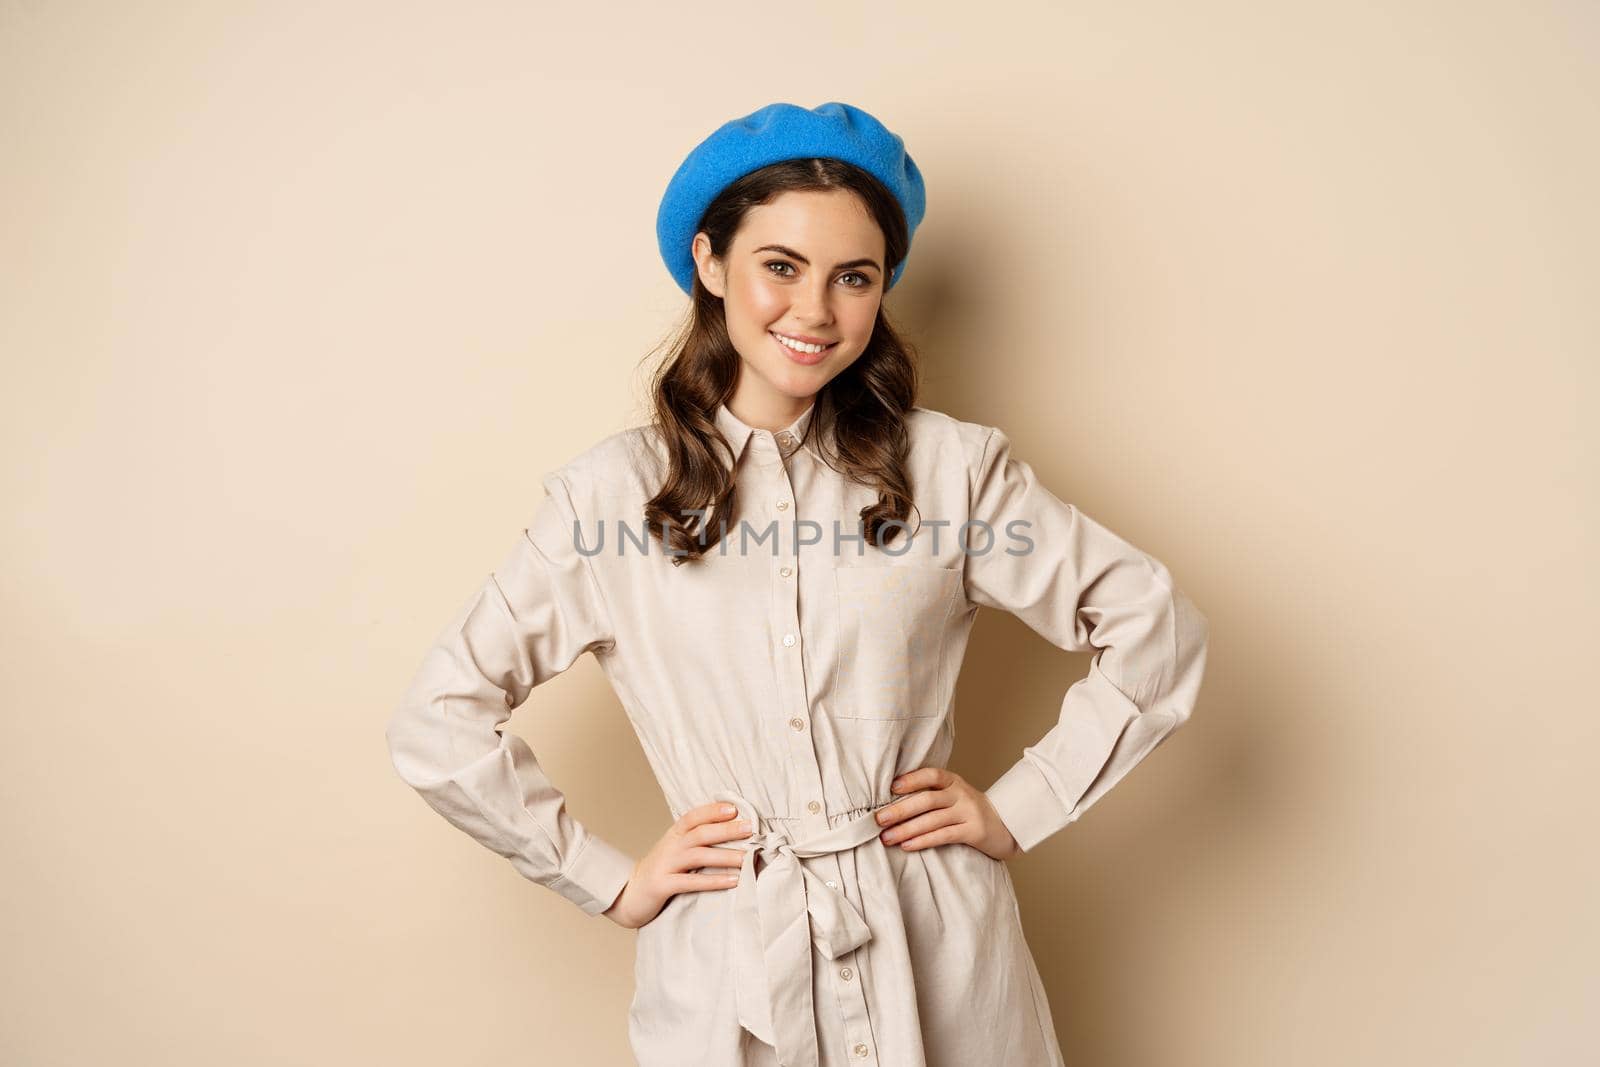 Portrait of trendy woman in trench coat and french hat, smiling and looking happy, posing in stylish outfit against beige background.